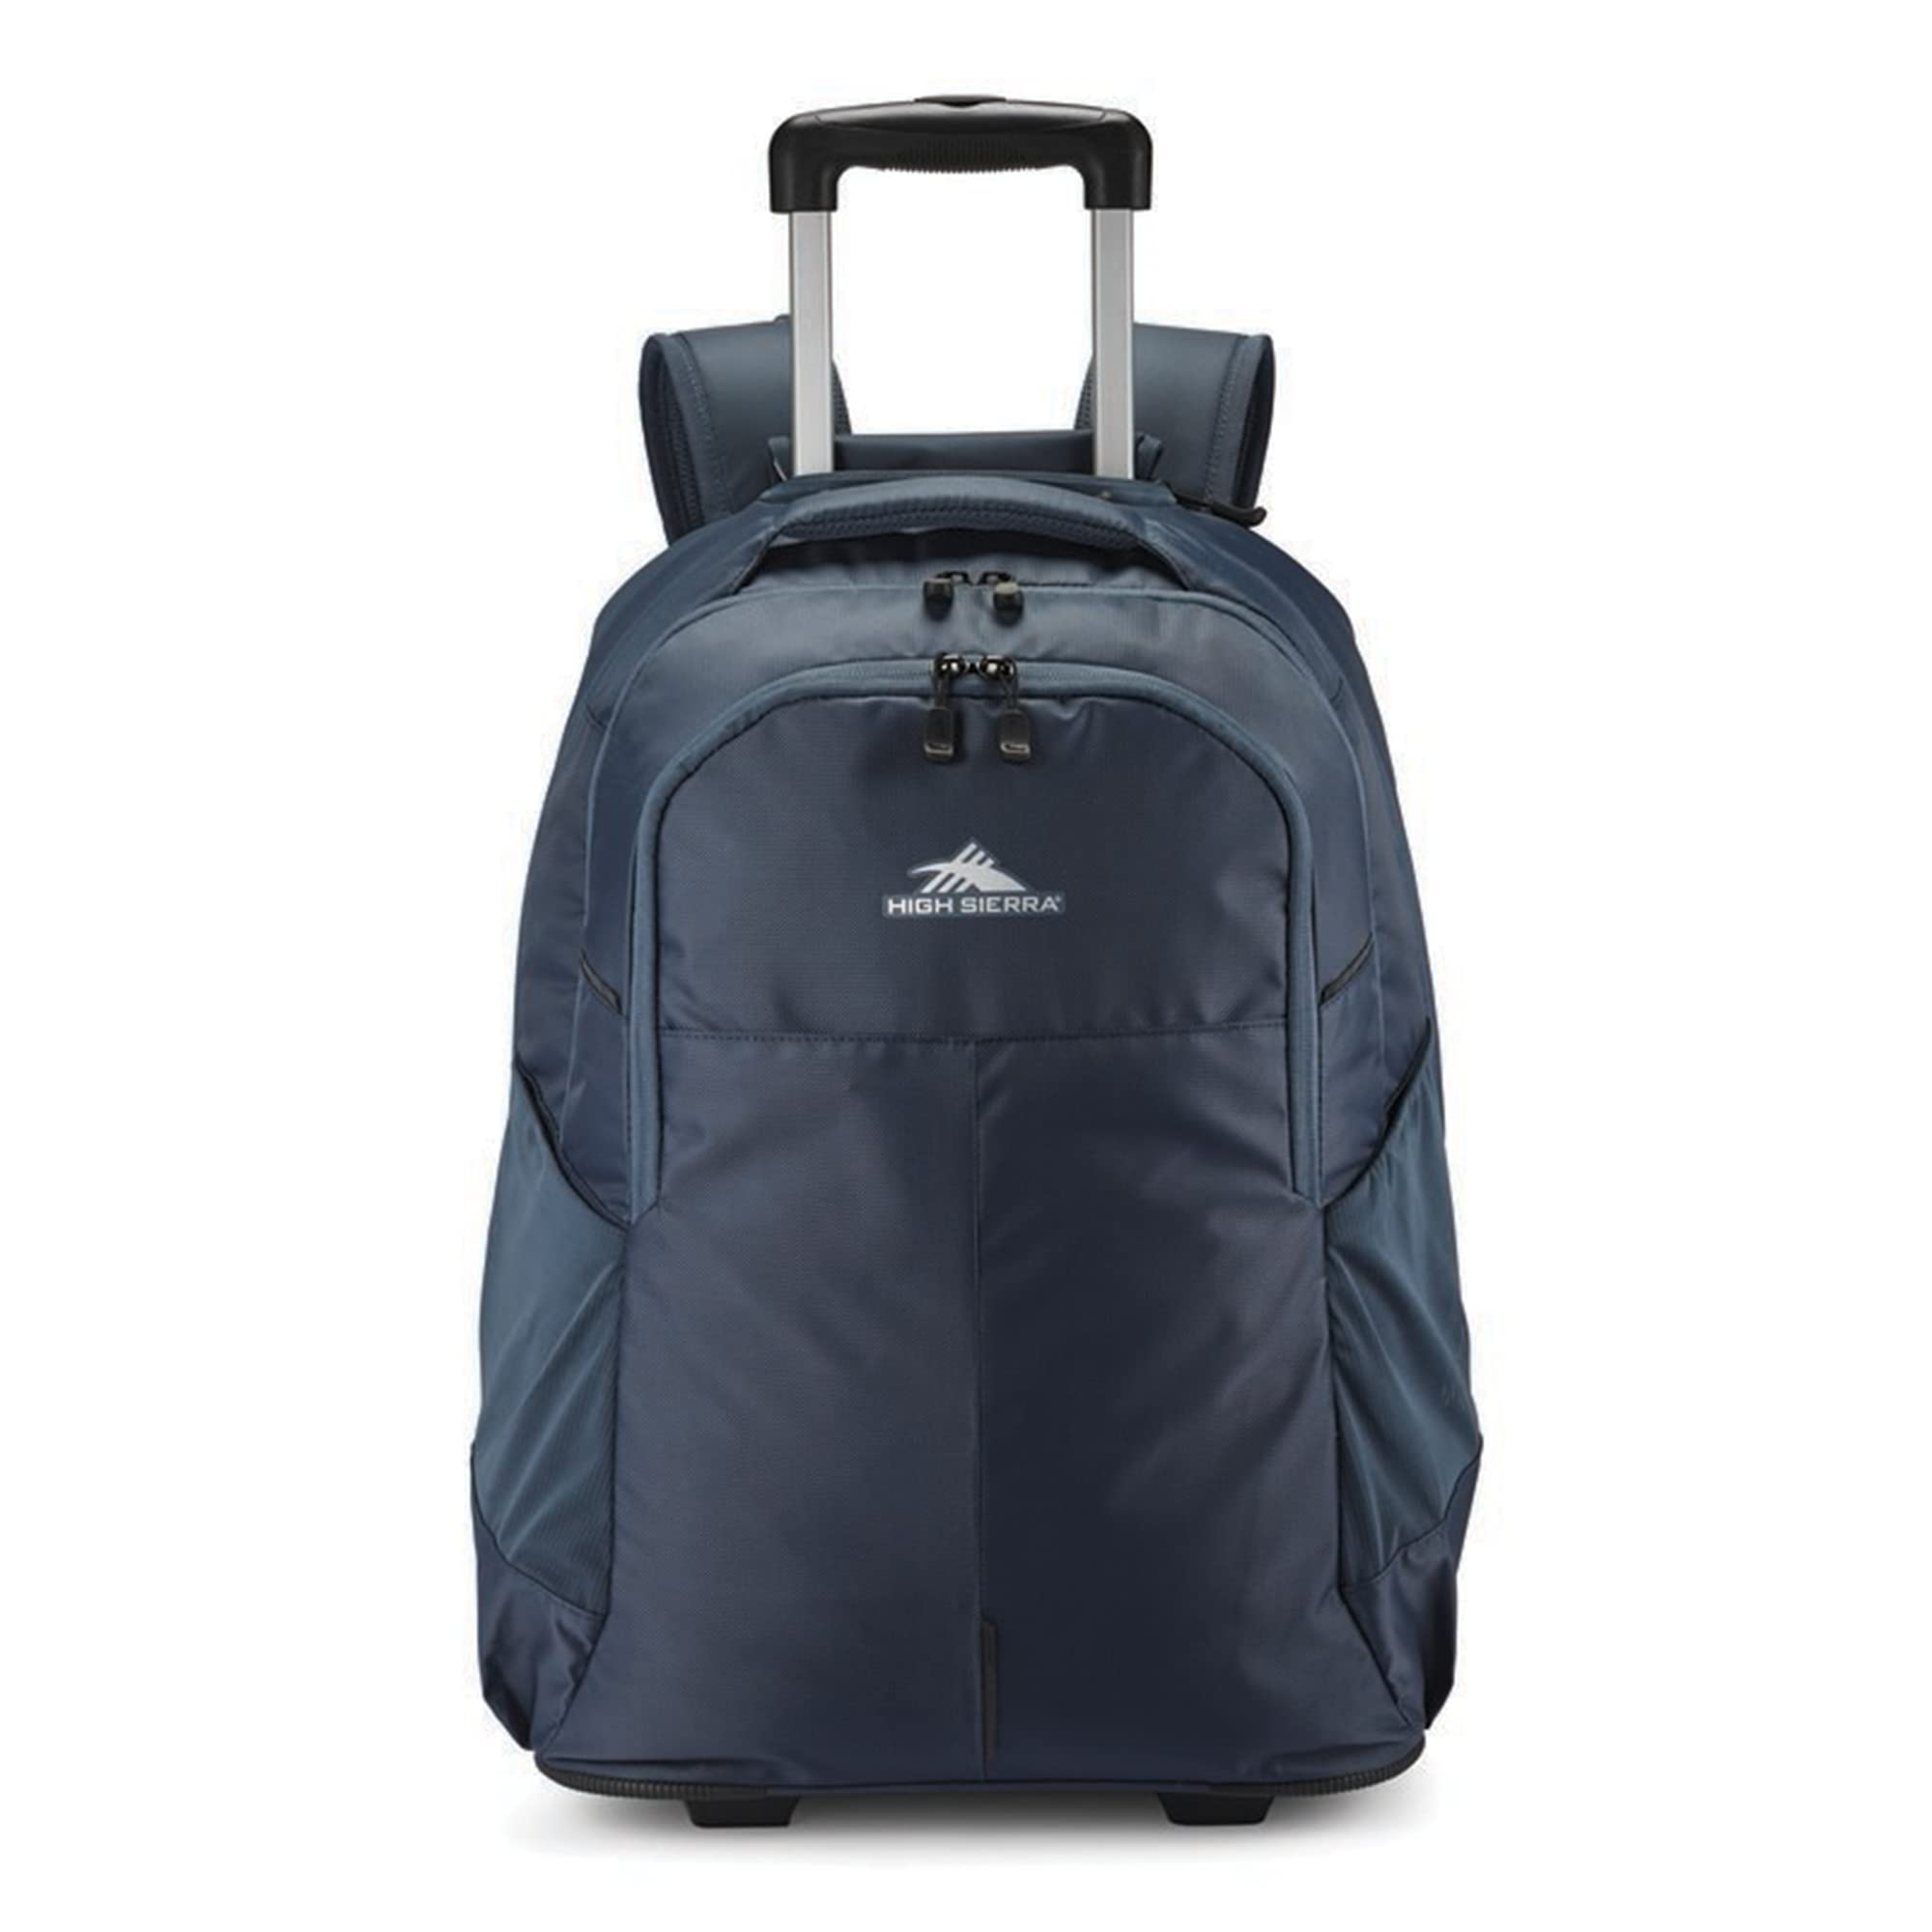 High Sierra Powerglide Pro Wheeled Daypack Backpack with 360 Degree Reflectivity, Telescoping Handle, Dual Side Pockets, and Laptop Sleeve, Fits Most 15.6" Laptops, 40L, Indigo Blue